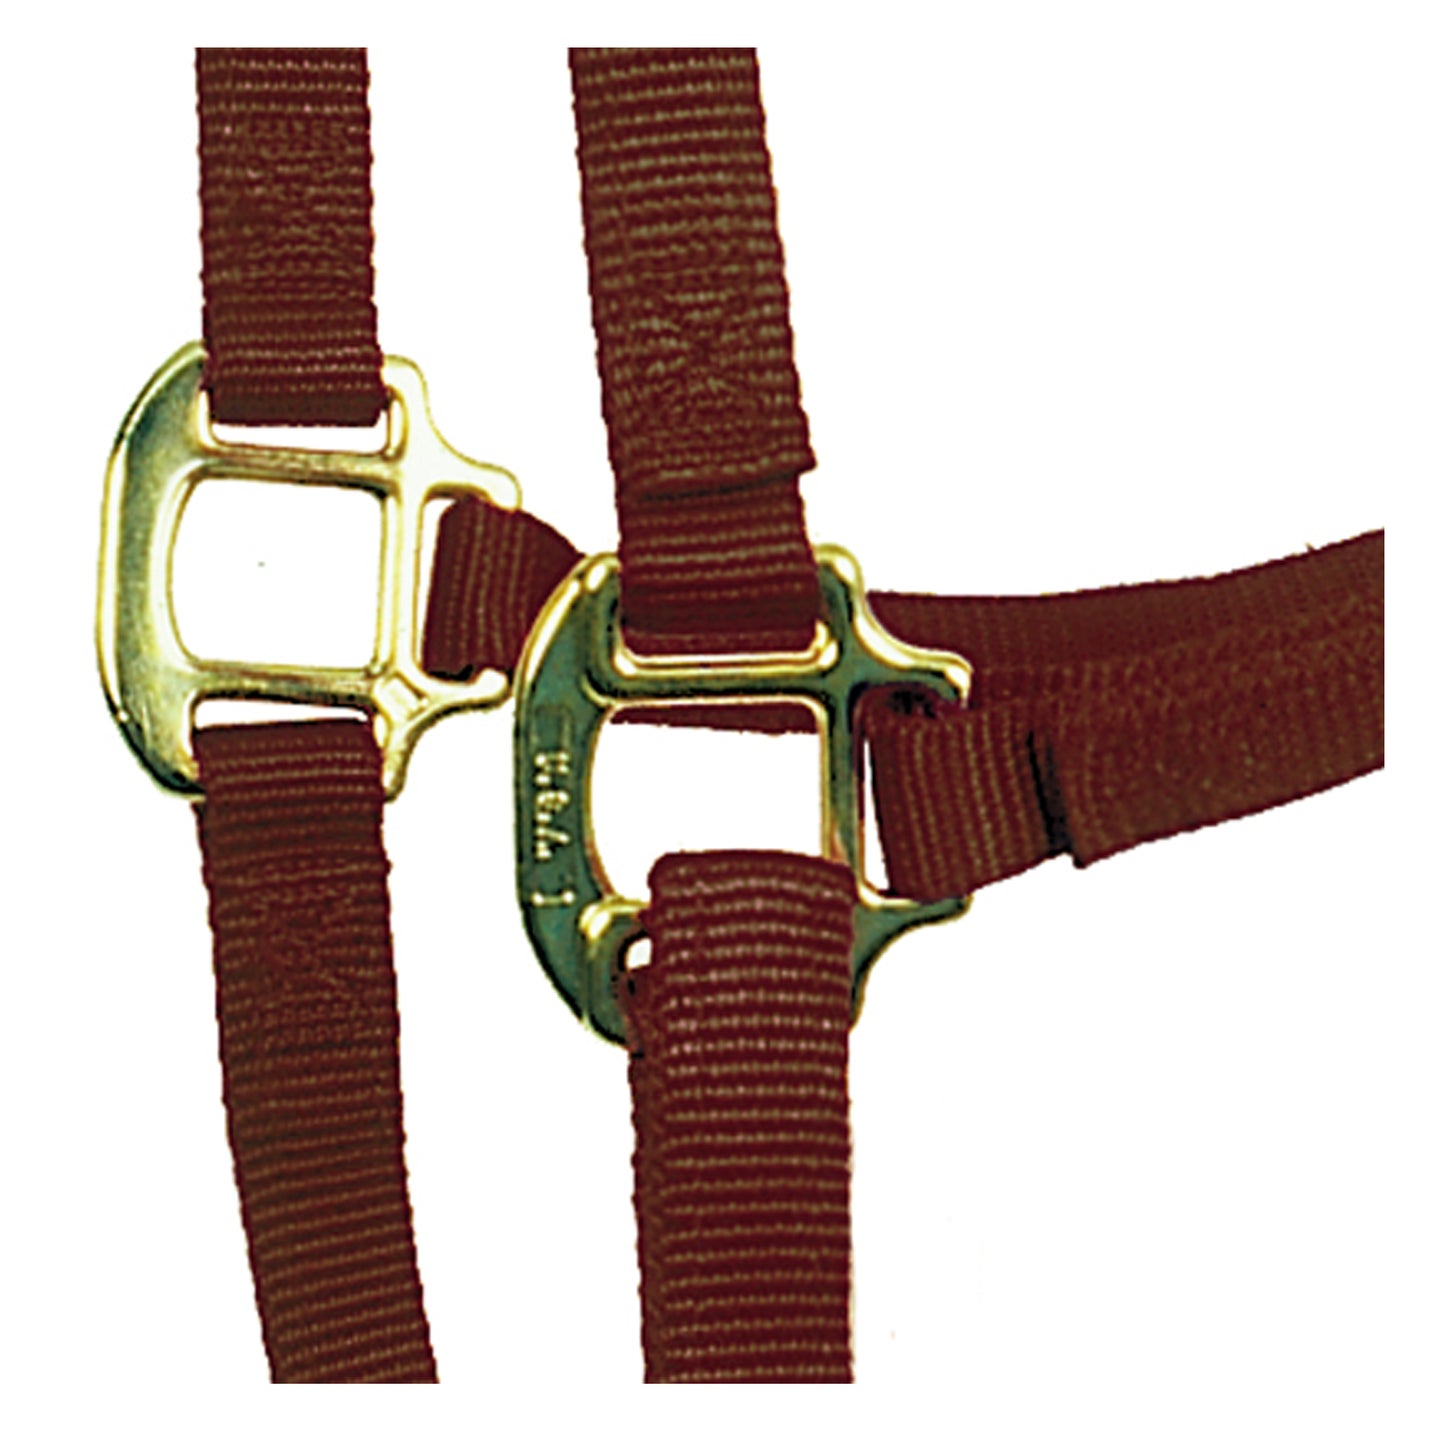 3/4" Comfort Fit Nylon Halter & Bridle Combo with Reins